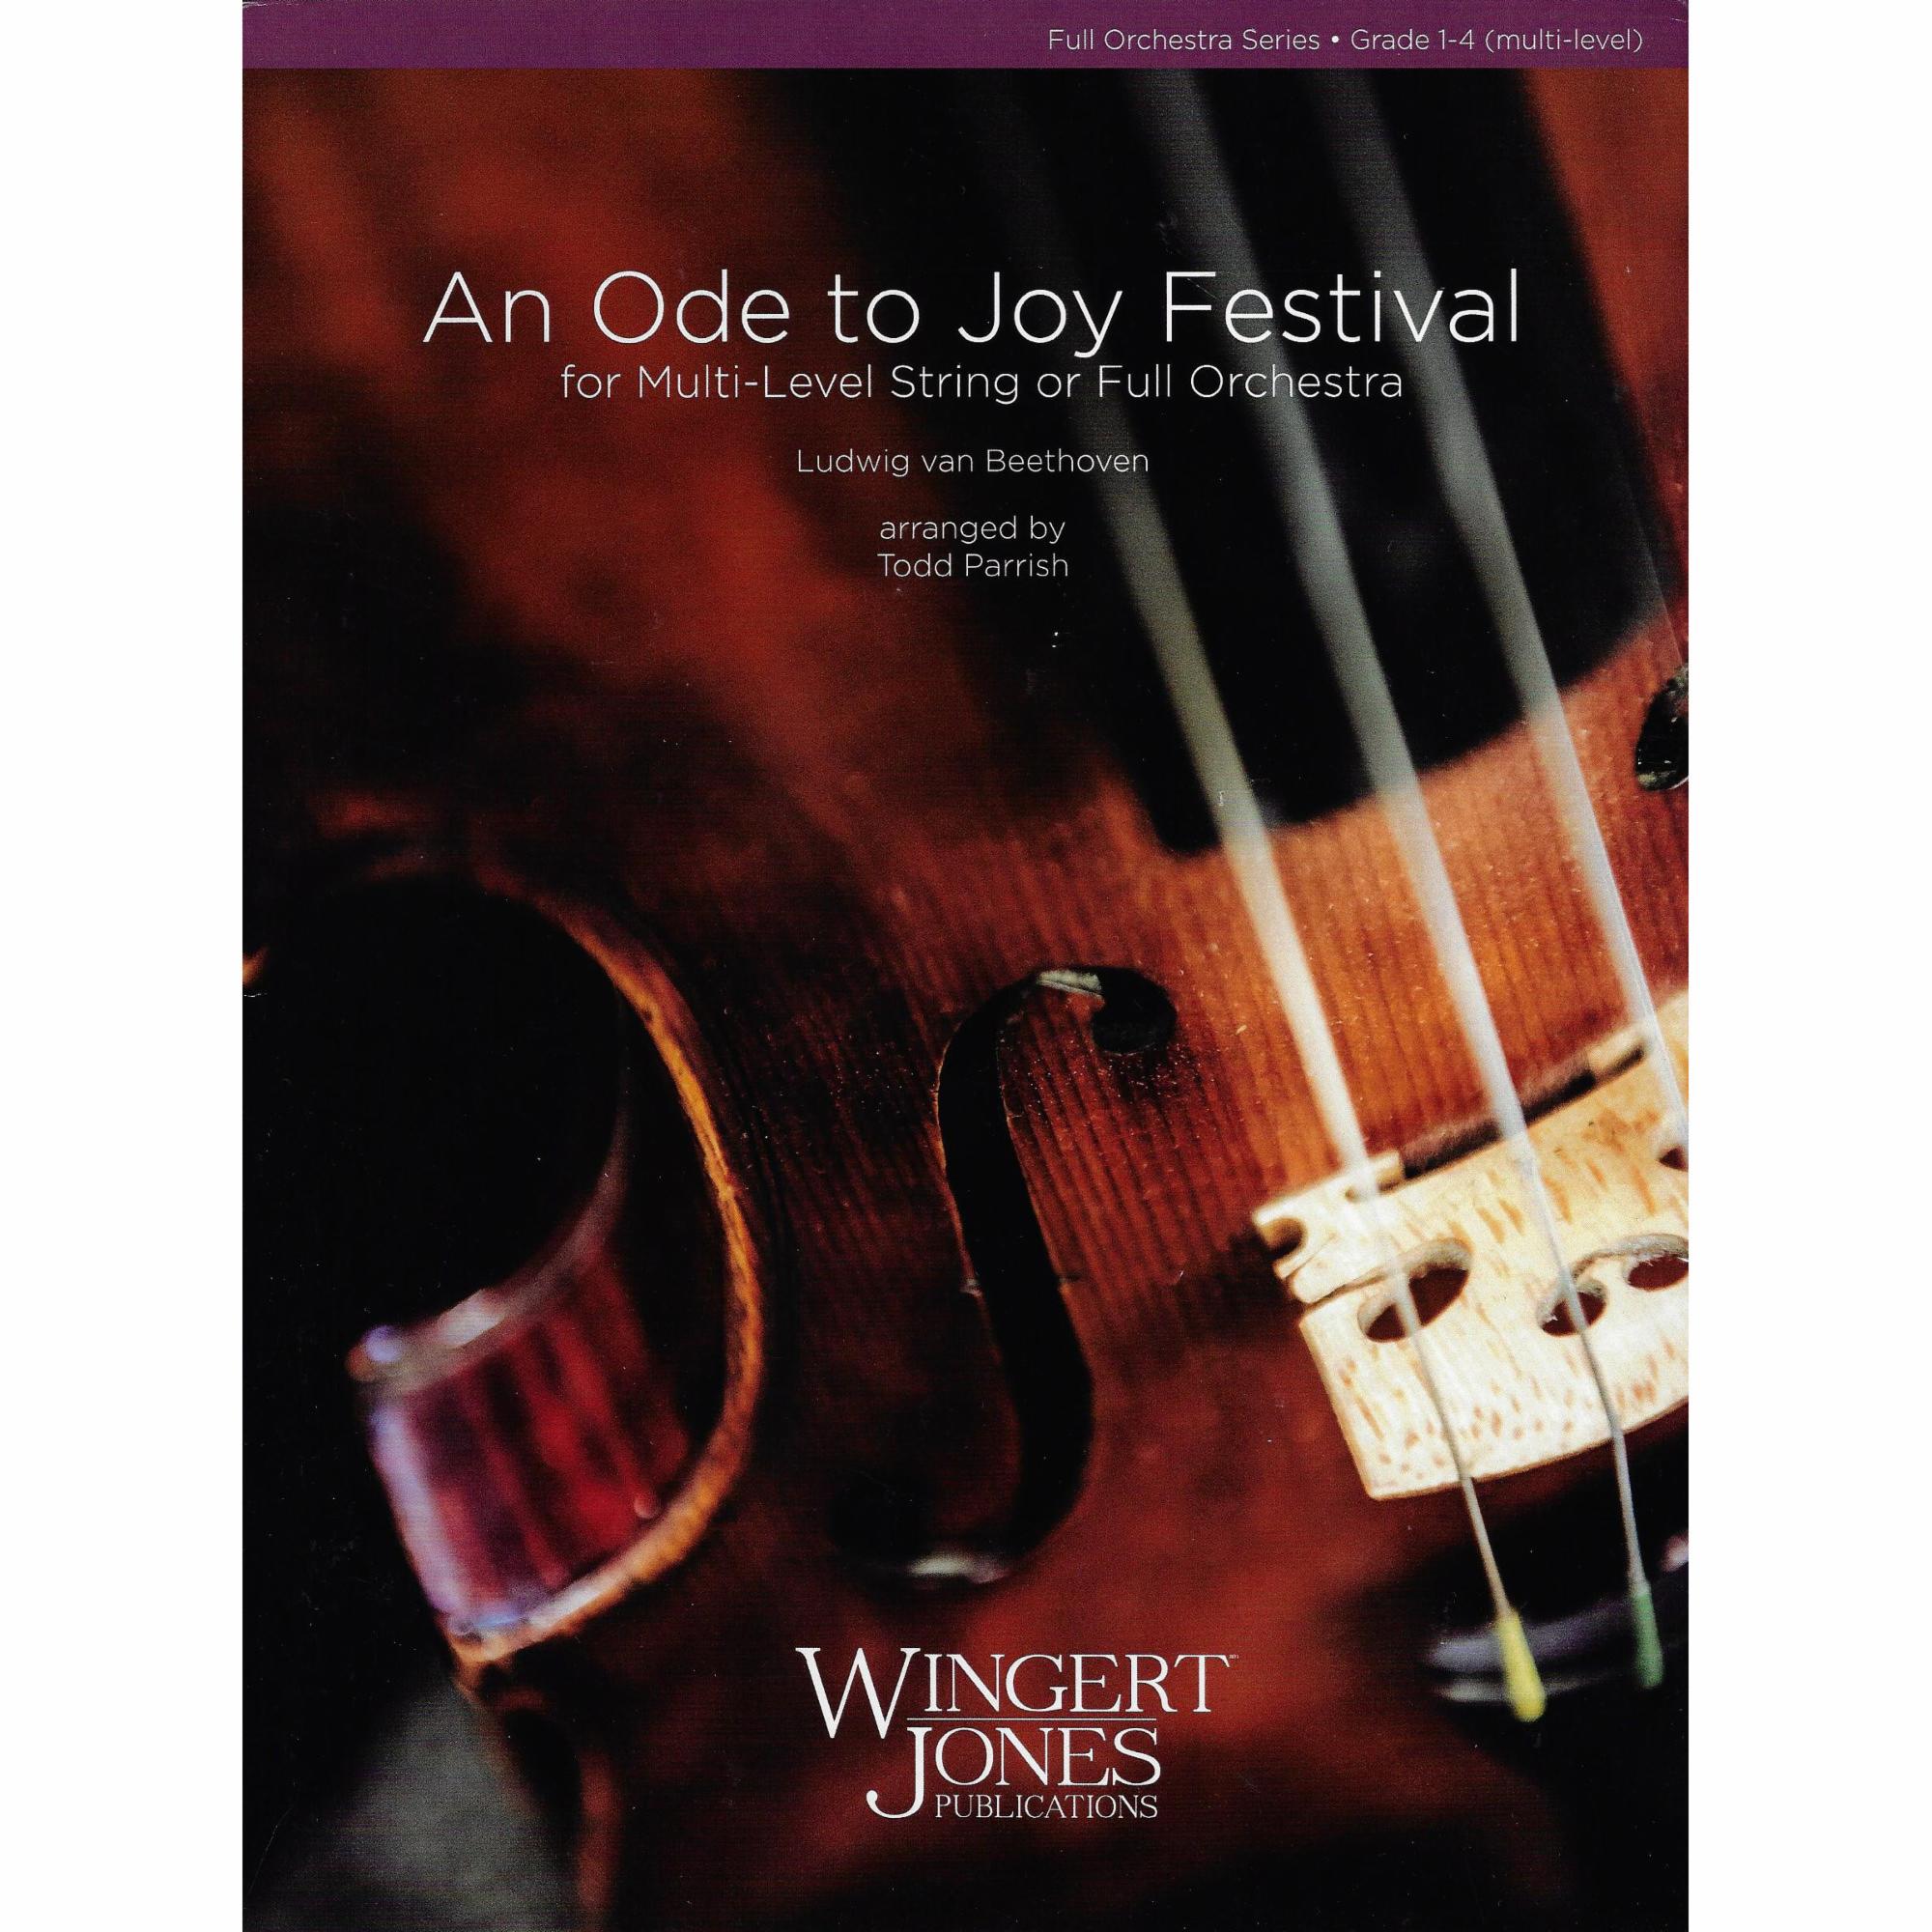 An Ode to Joy Festival for Multi-Level String or Full Orchestra